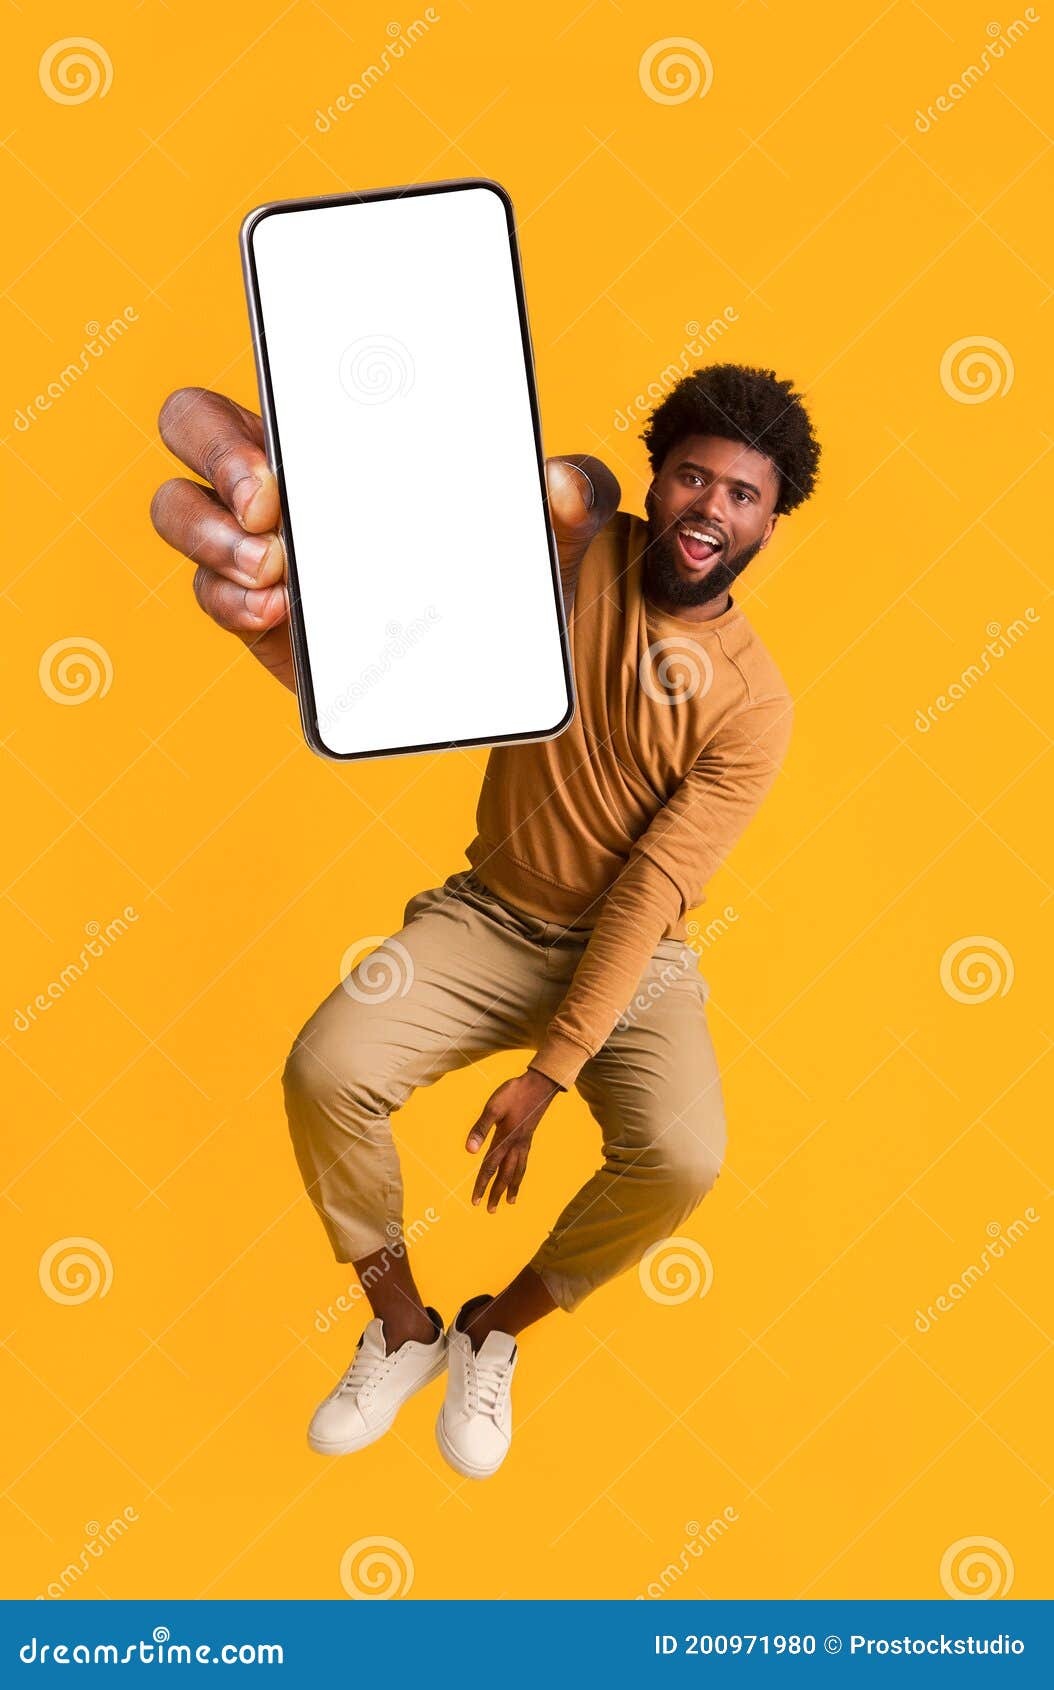 excited black guy holding smartphone, jumping up